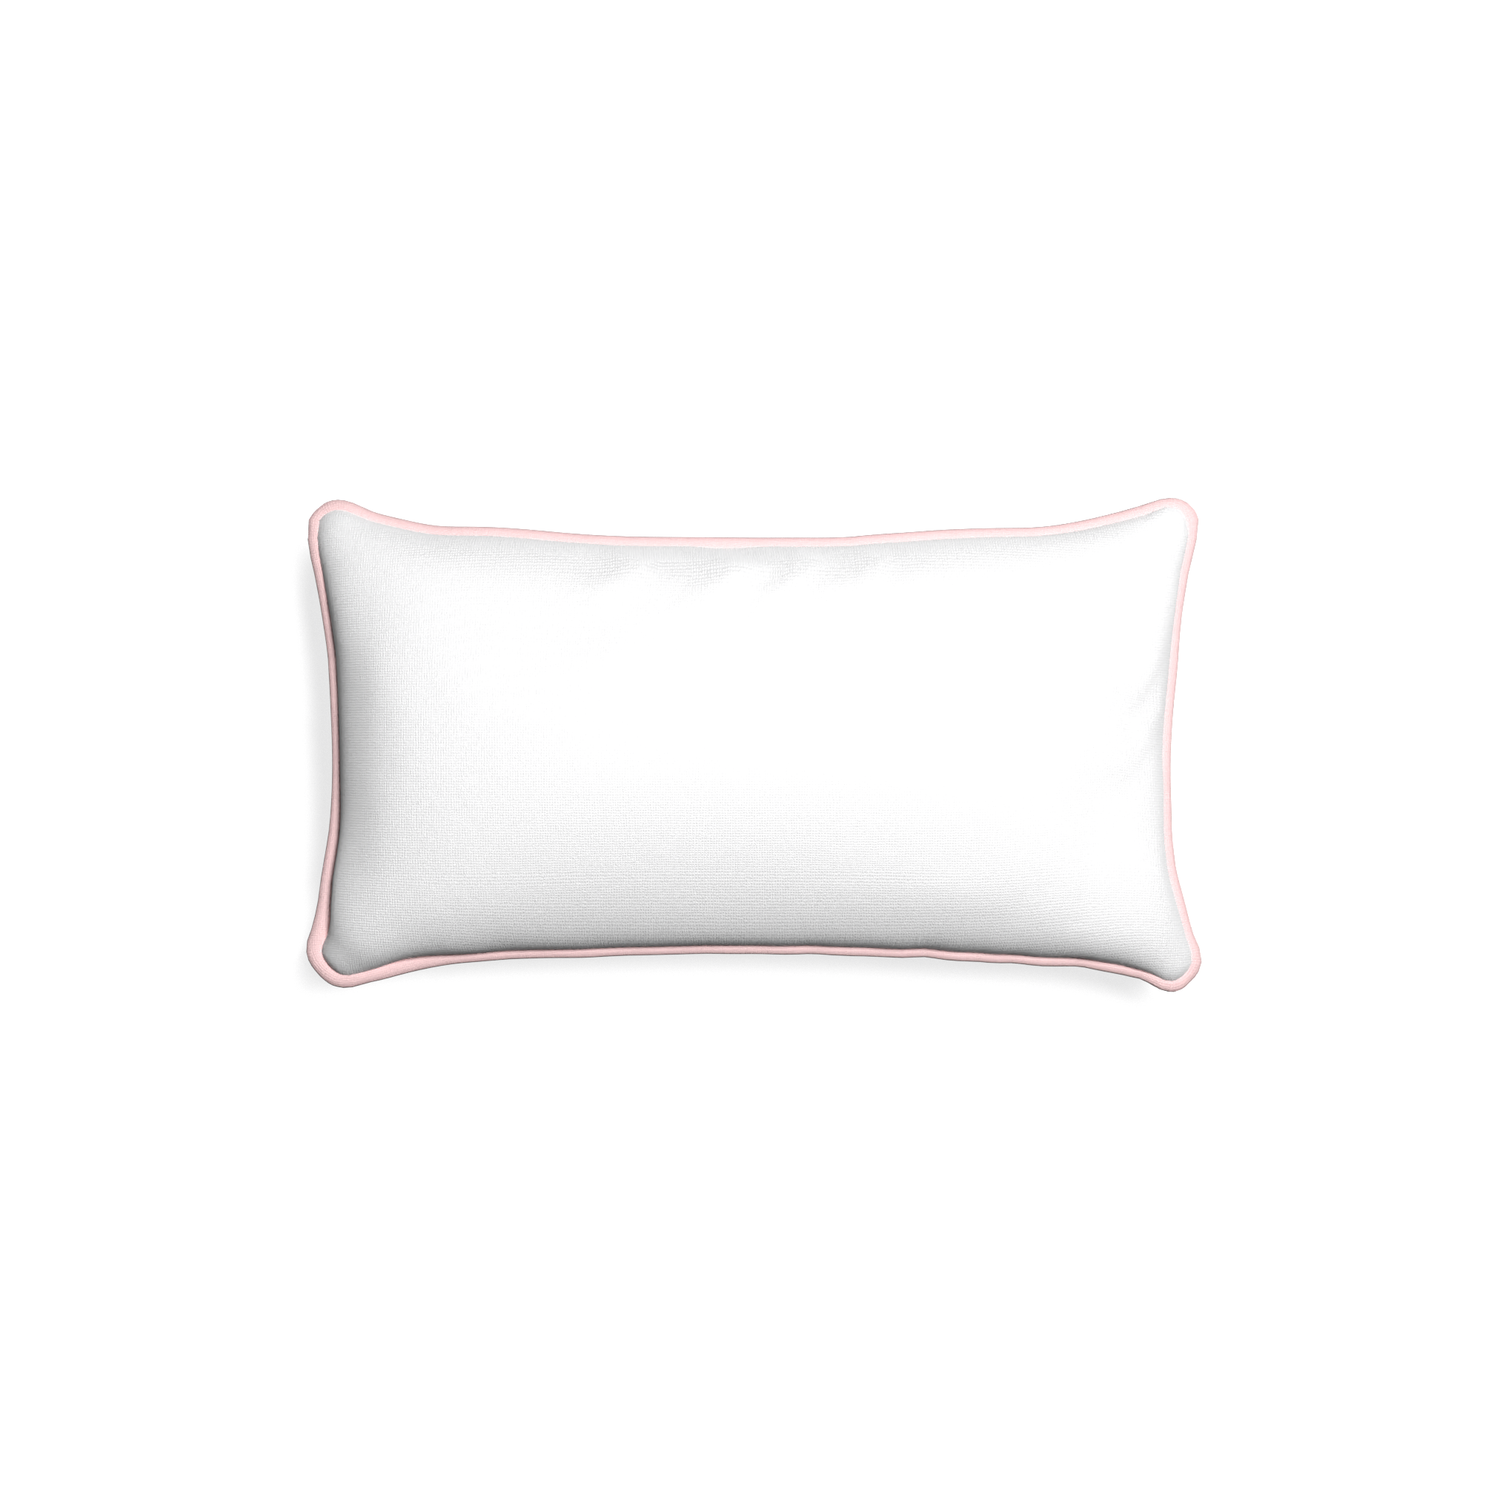 Petite-lumbar snow custom white cottonpillow with petal piping on white background